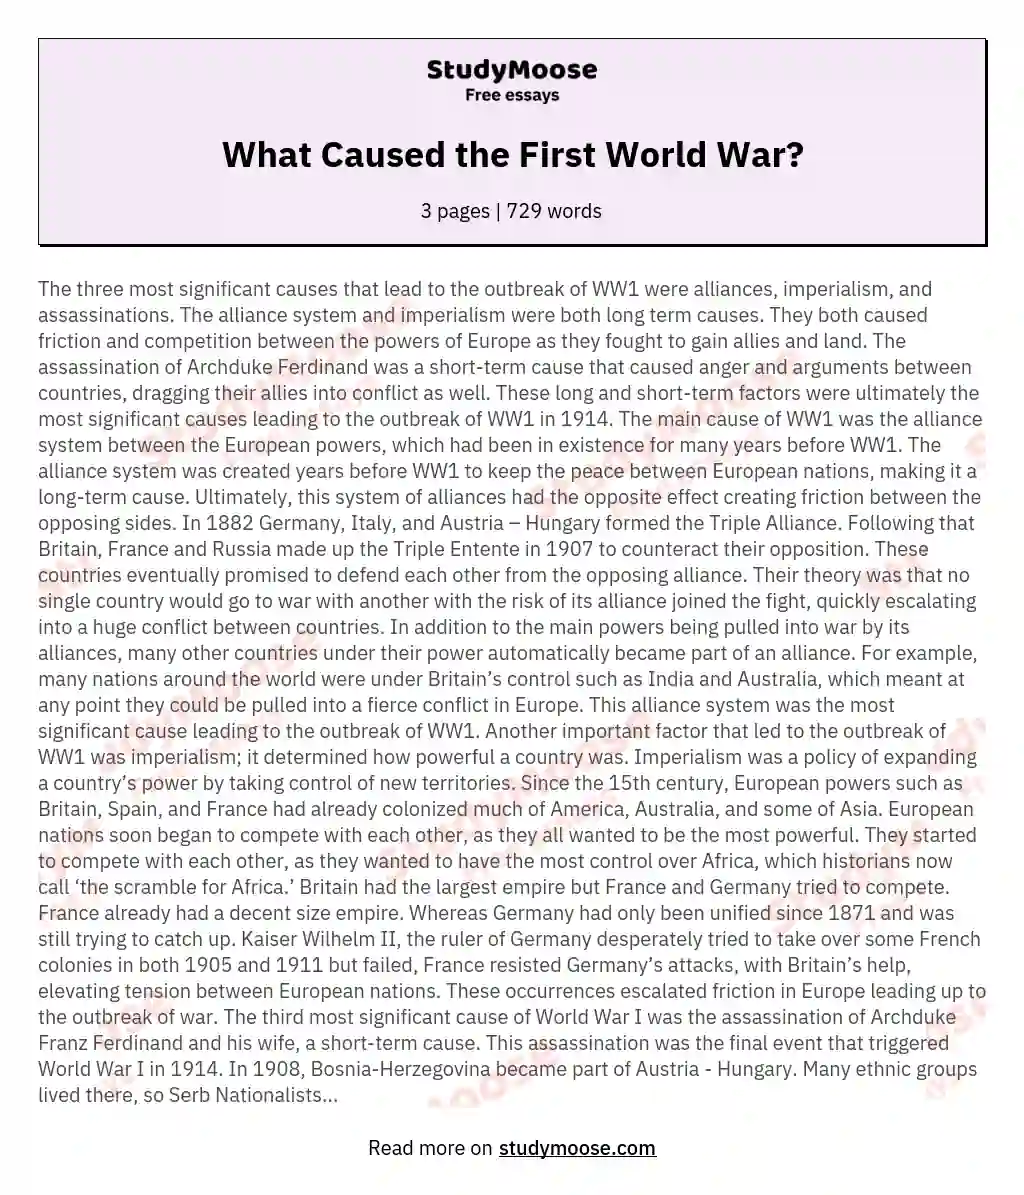 What Caused the First World War? essay